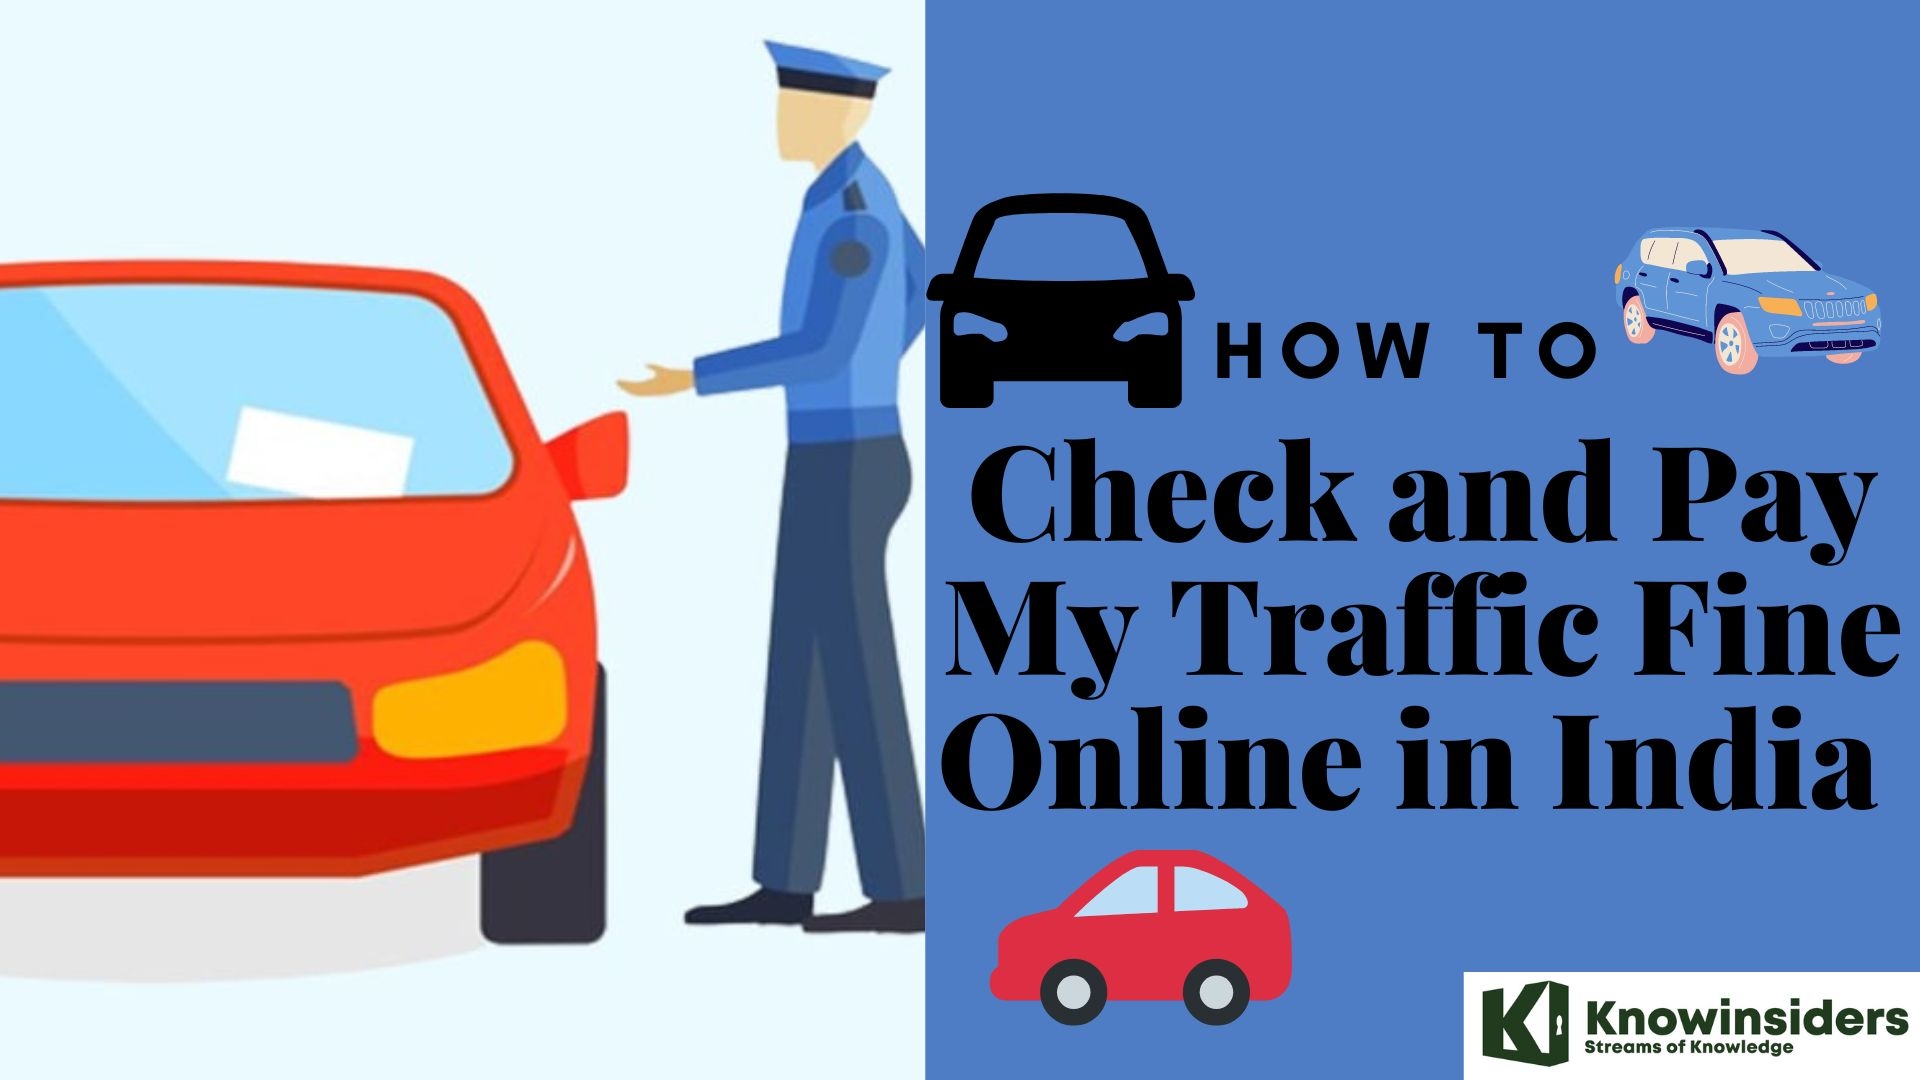 How To Check and Pay My Traffic Fine Online in India Knowinsiders.com 